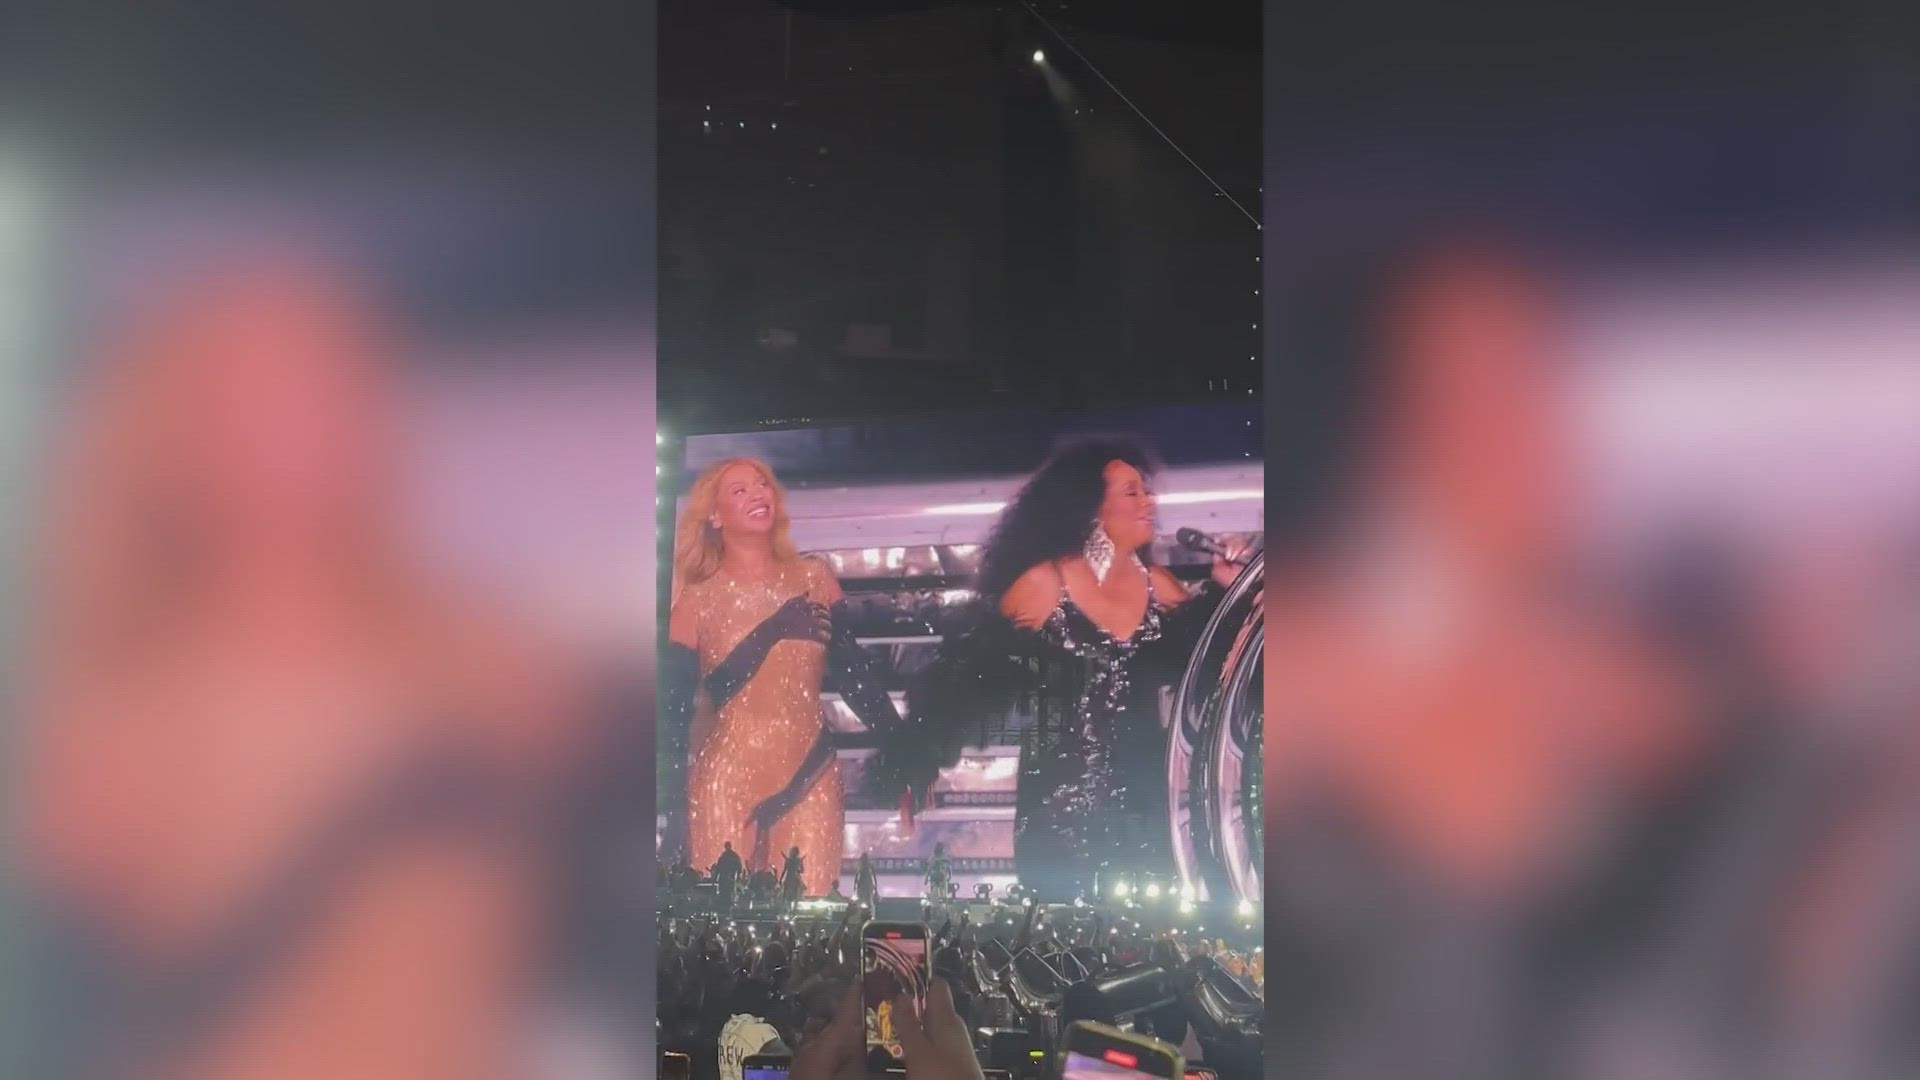 Beyoncé Birthday Show in Los Angeles Brings Out Star-Studded Audience